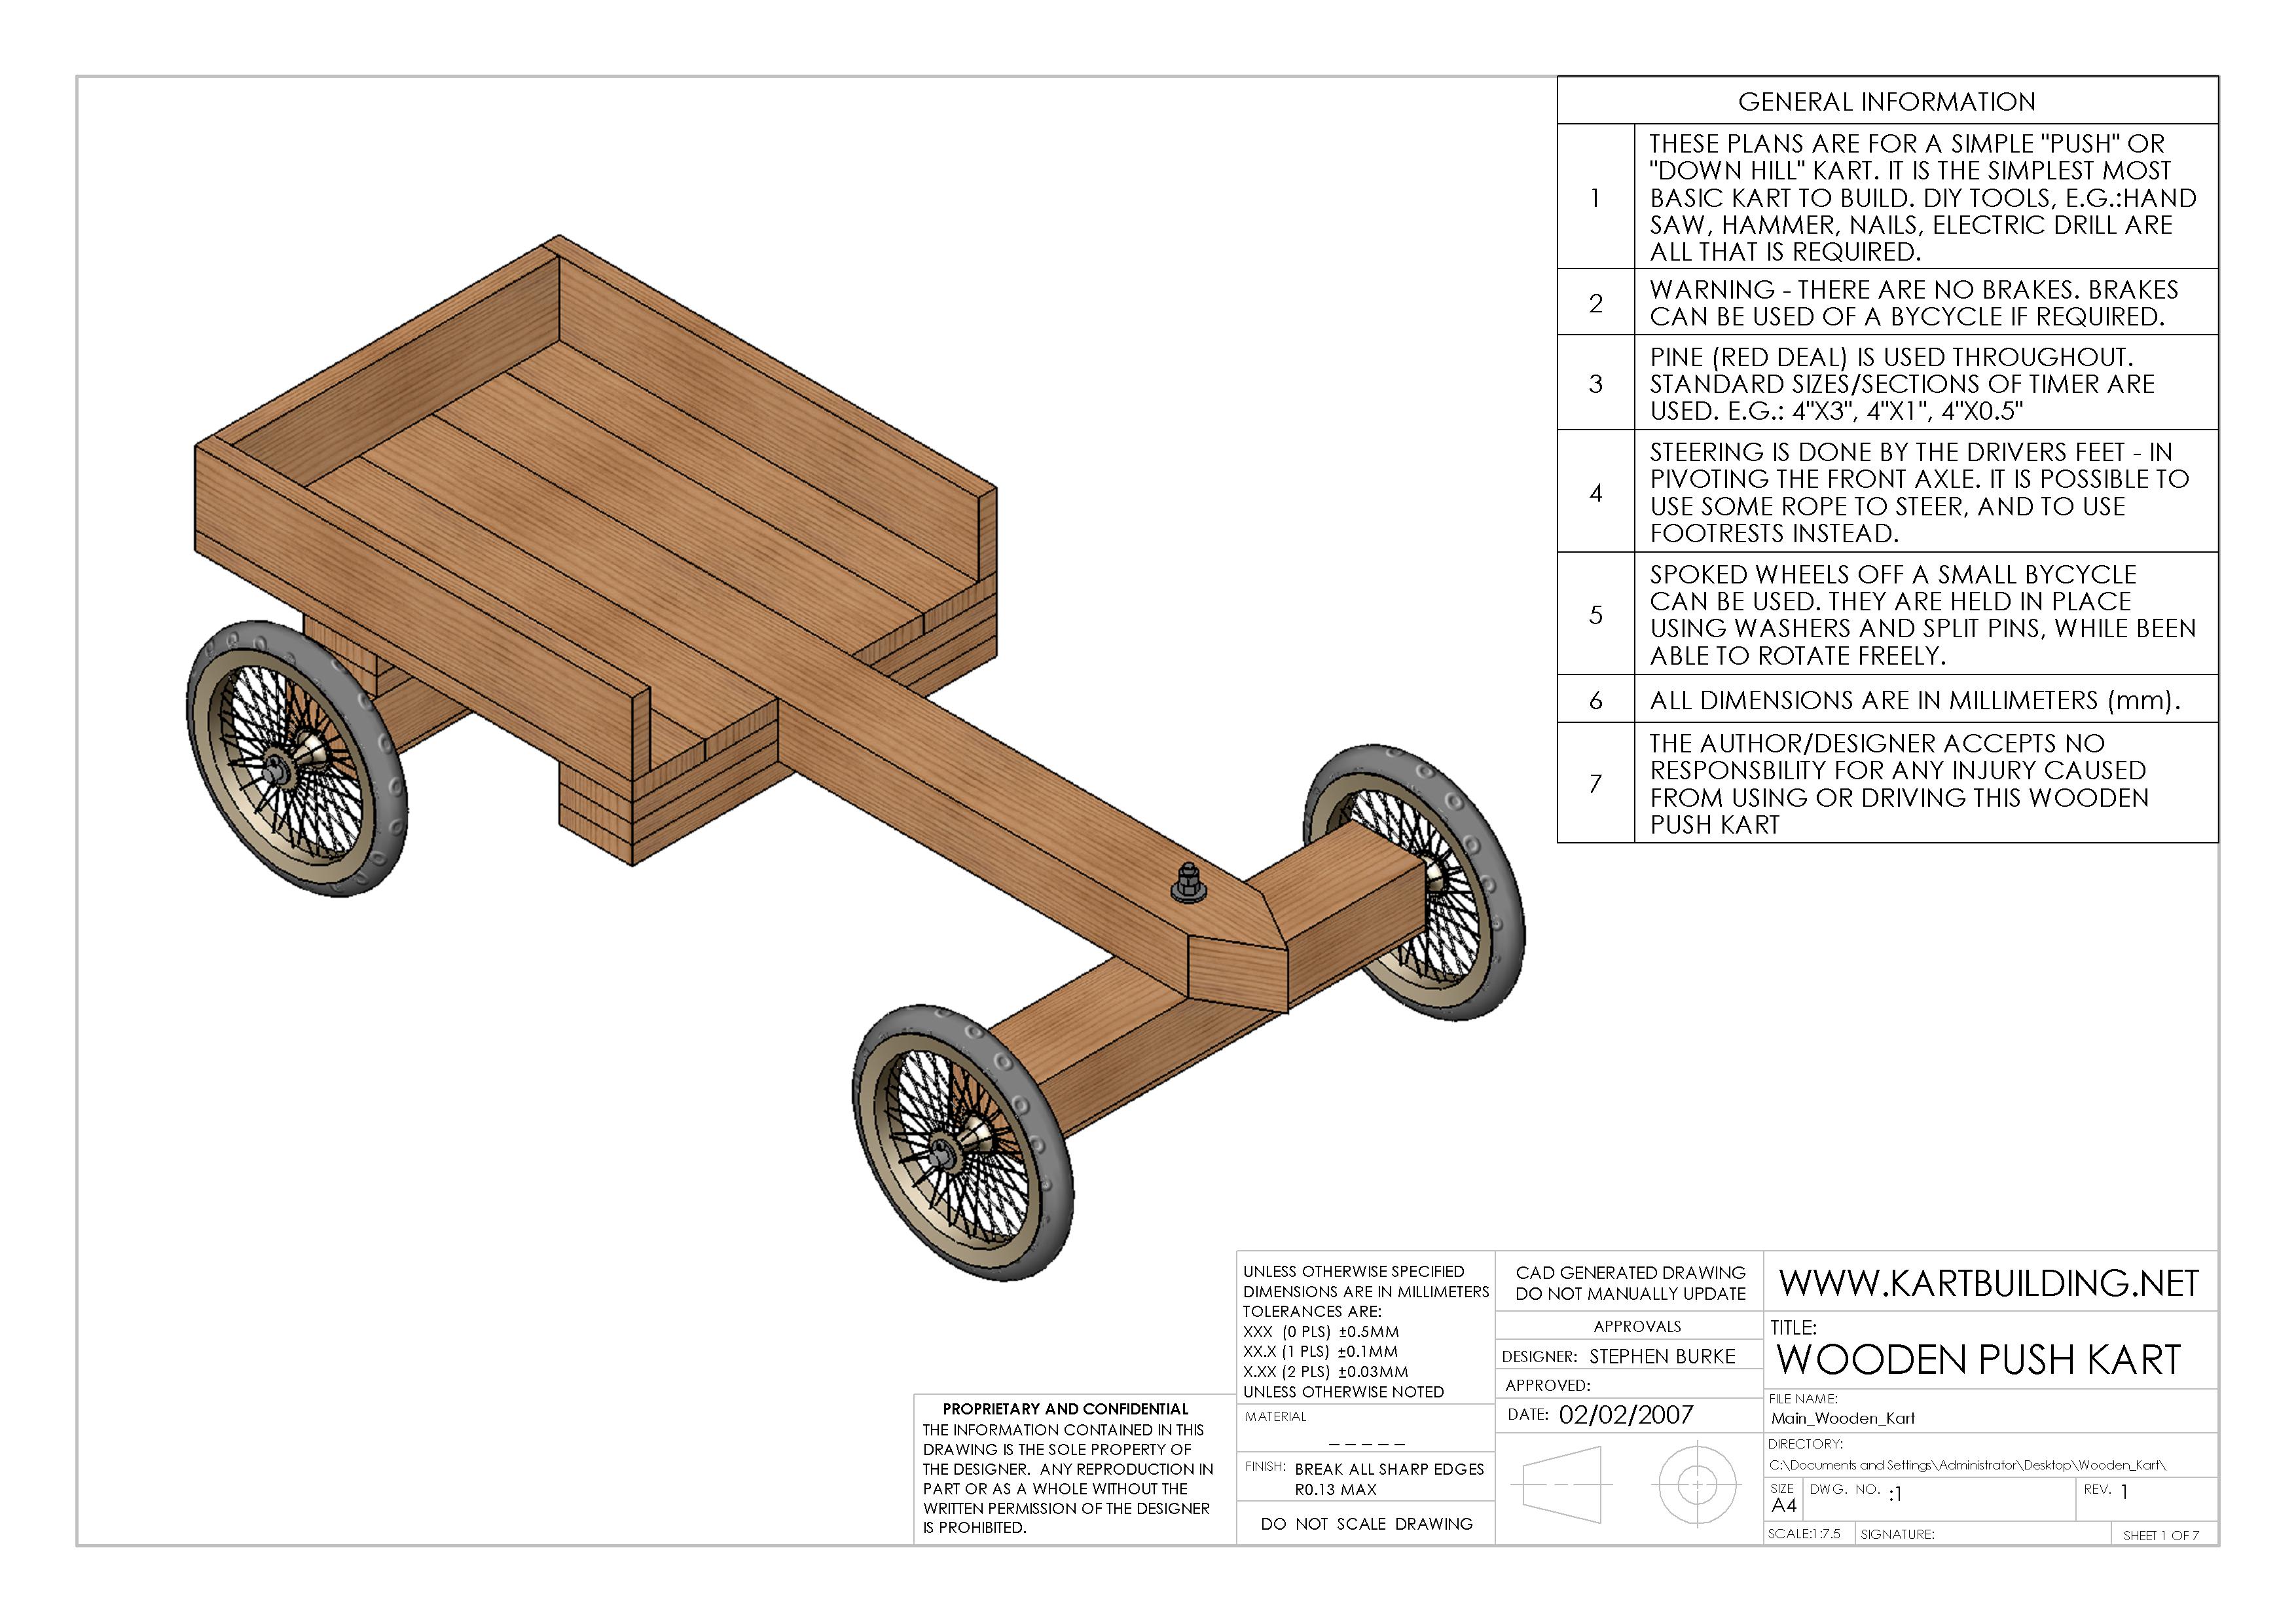 Free Wooden Go-Kart Plans :: How to build a simple wooden go-kart